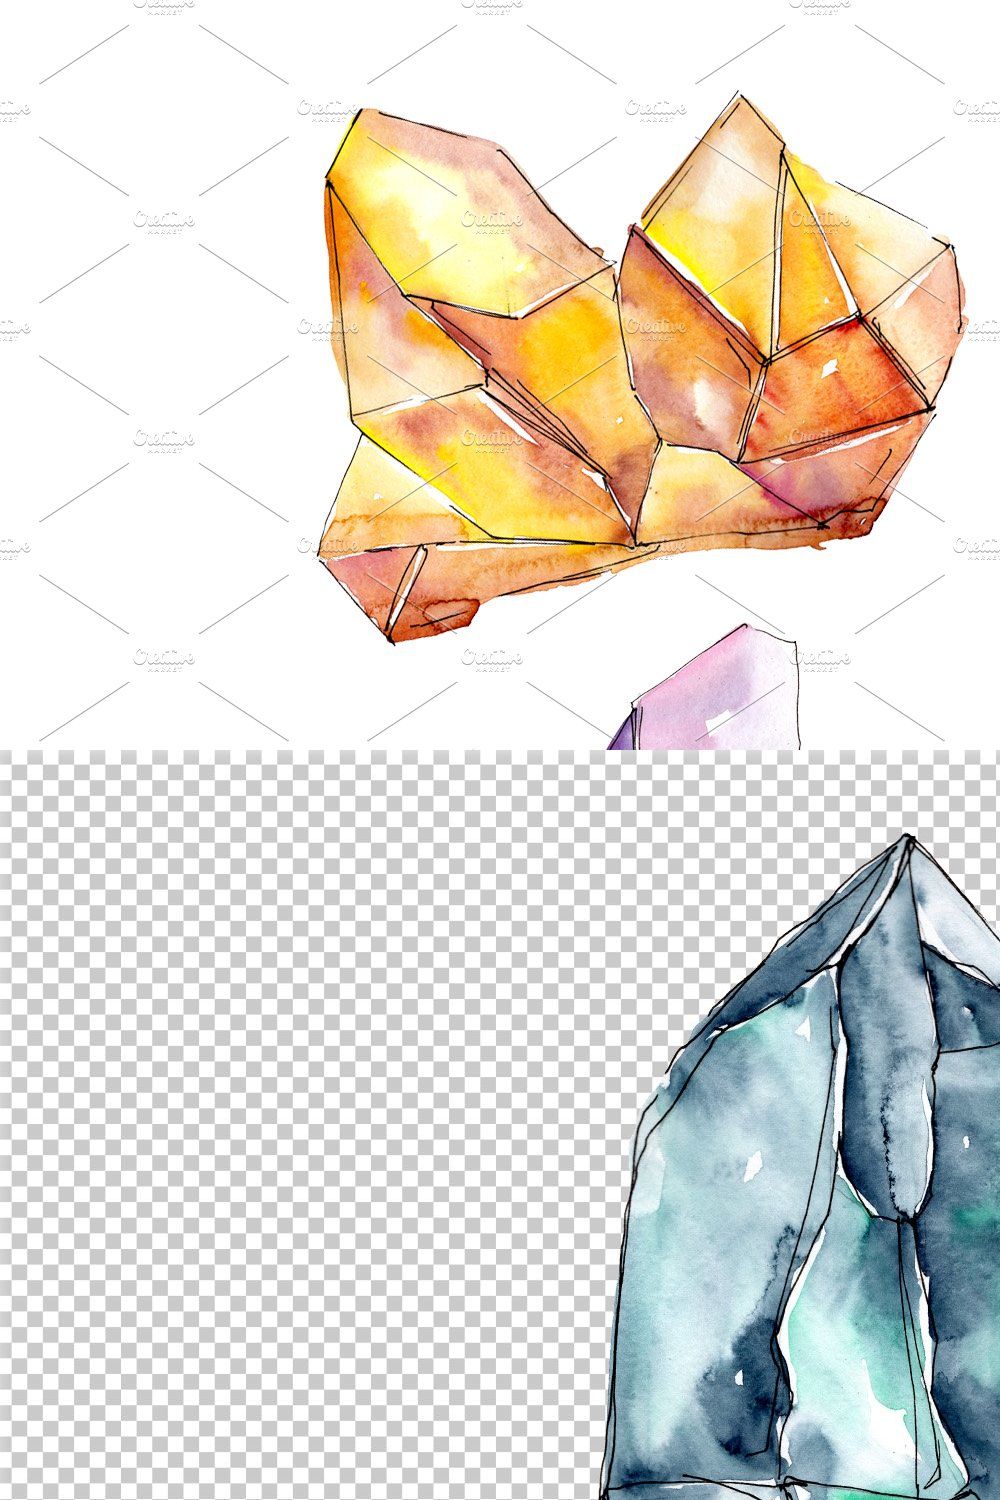 Aquarelle colorful geometric crystal pinterest preview image.